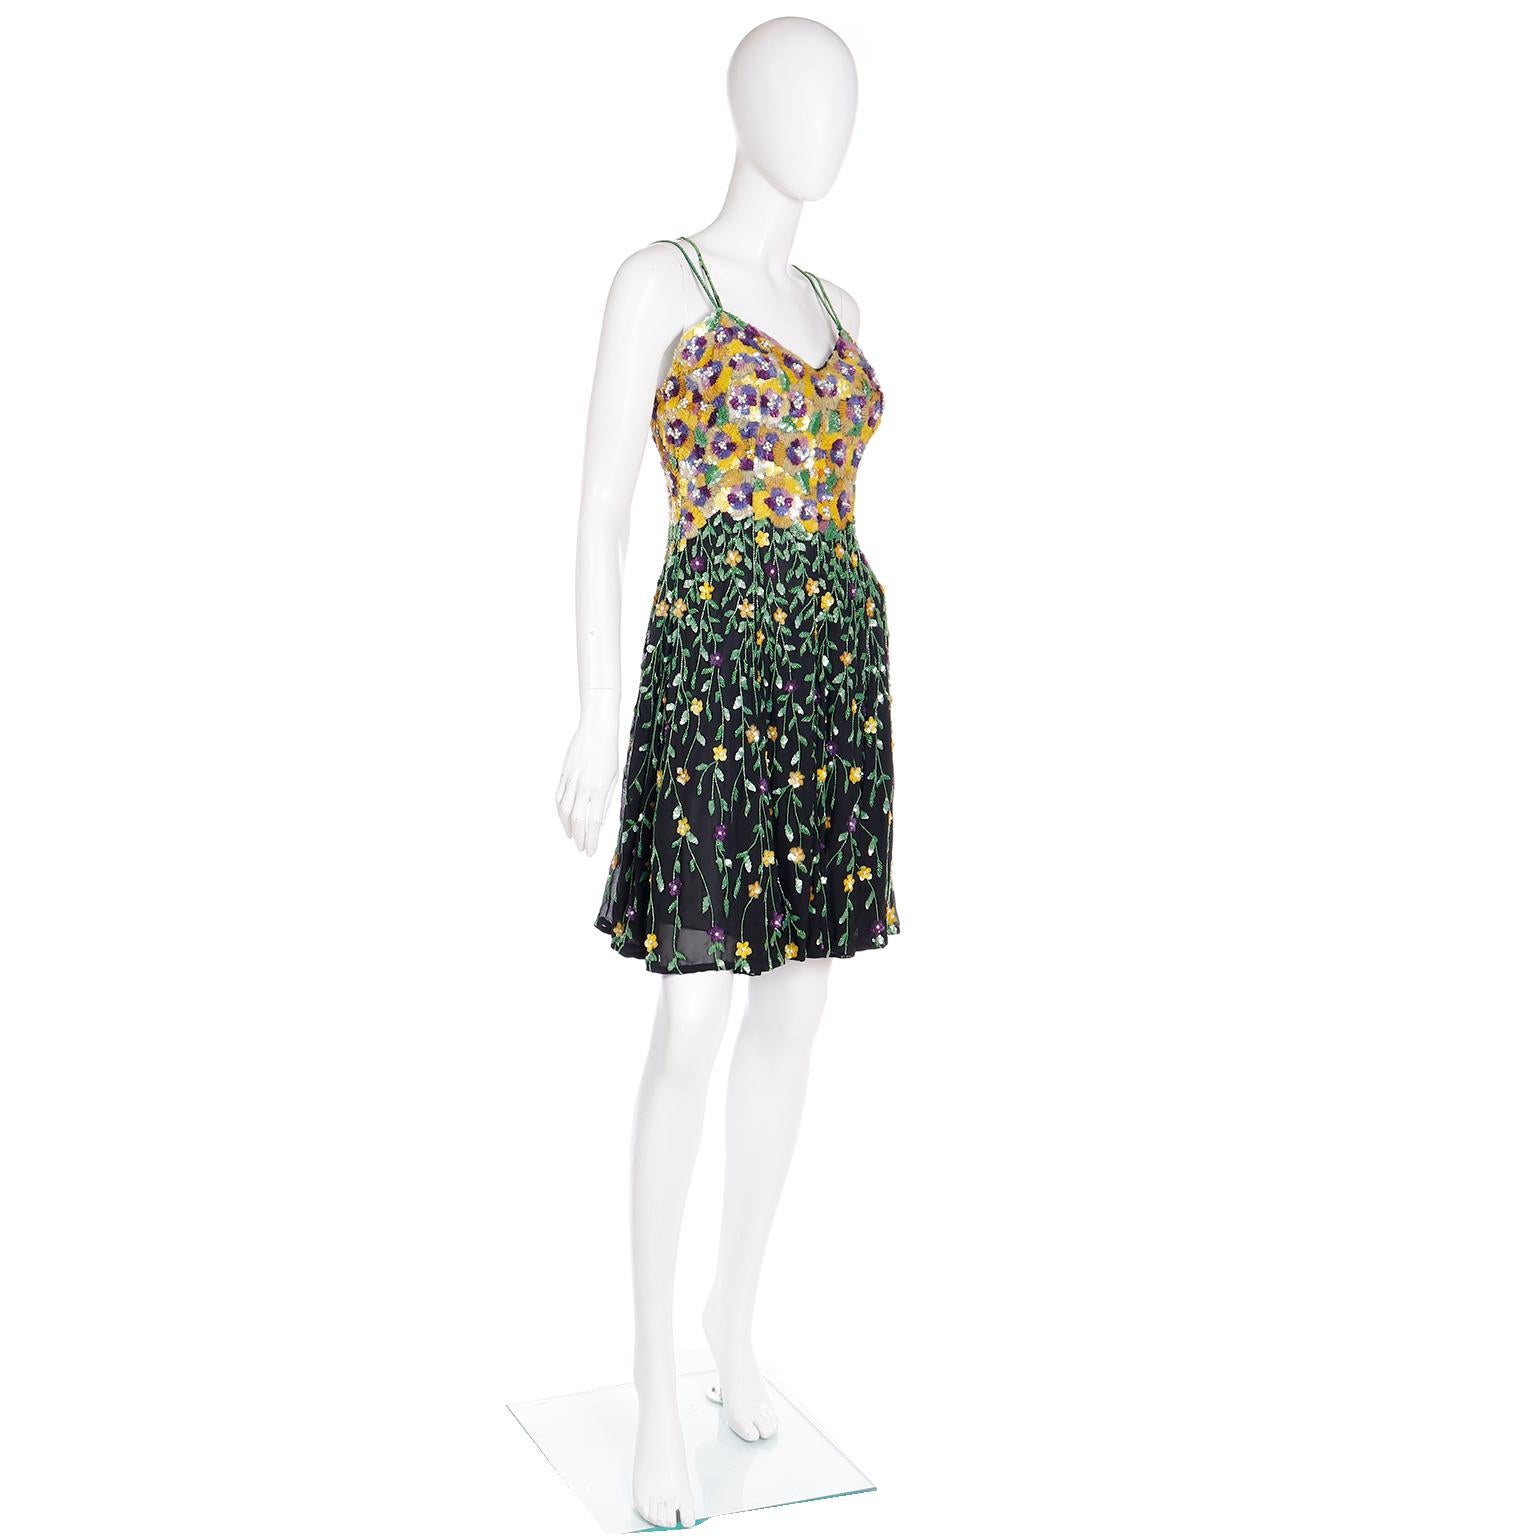 Naeem Khan Riazee Boutique Vintage Beaded Sequin Floral Mini Evening Dress In Excellent Condition For Sale In Portland, OR